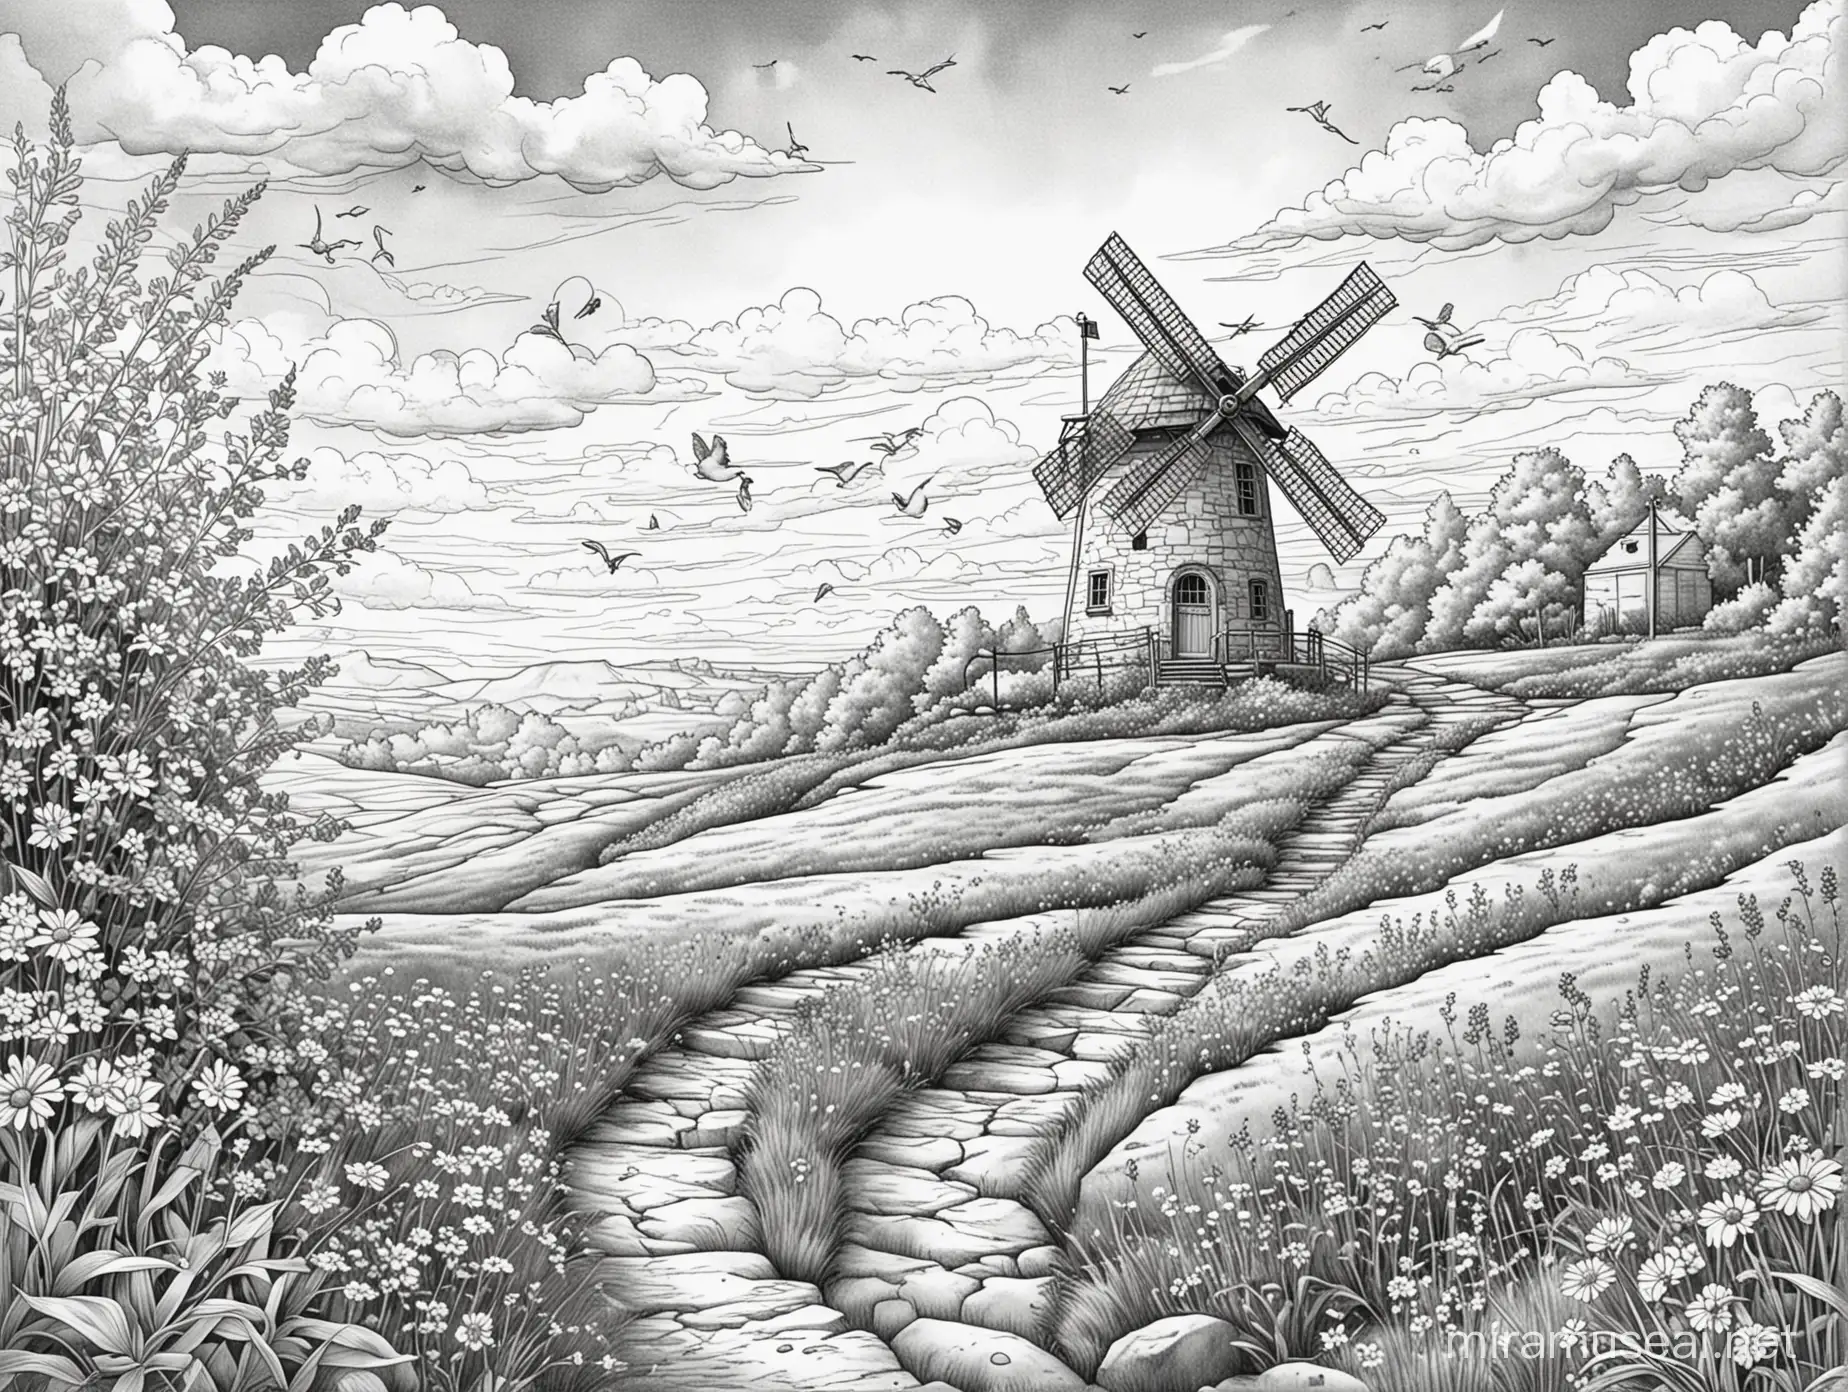 Coloring Page: 

Scene: A rolling hill dotted with wildflowers stretches towards the sky with fluffy clouds drifting by.

Windmill:

Use bold black outlines to capture the windmill's whimsical charm.
The windmill tower could be a squat cylinder with a rounded top.
A tiny, crooked door with a heart-shaped window sits at the base of the windmill.
Atop the windmill is a whimsical weathervane.

Details:

Around the base of the windmill, a winding path paved with stones leads uphill.
Nestled amongst the wildflowers, a family of friendly ladybugs crawl on blades of grass.
In the distance, a flock of birds soars across the sky.

Coloring Freedom:  This coloring page offers plenty of space for creativity.  No colors used, except black and white.  Clear lines.  High contrast.  No shading.